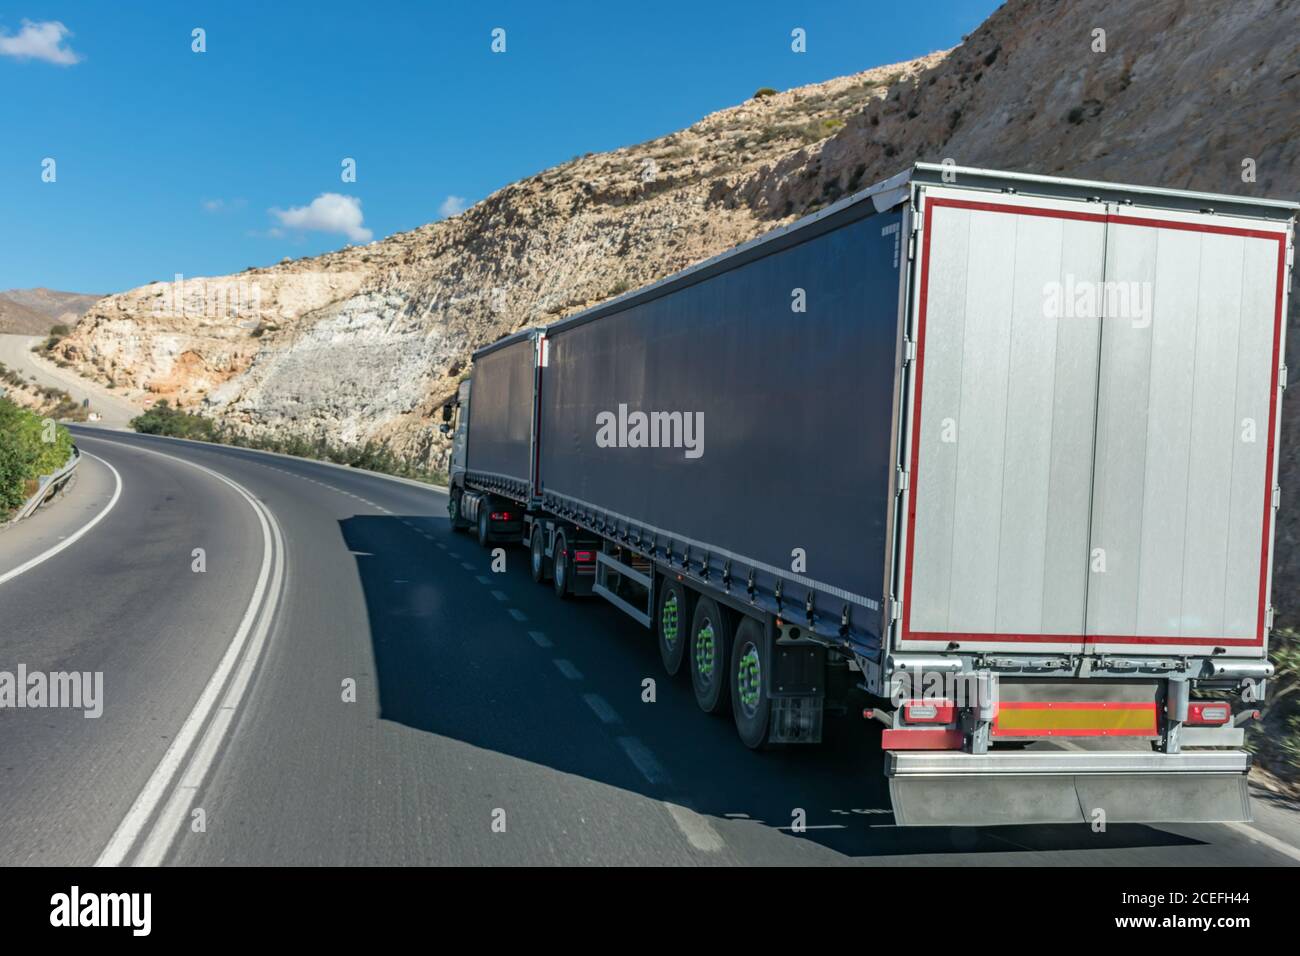 Mega trailer or road train, truck with two semi-trailers authorized to transport sixty tons. Stock Photo